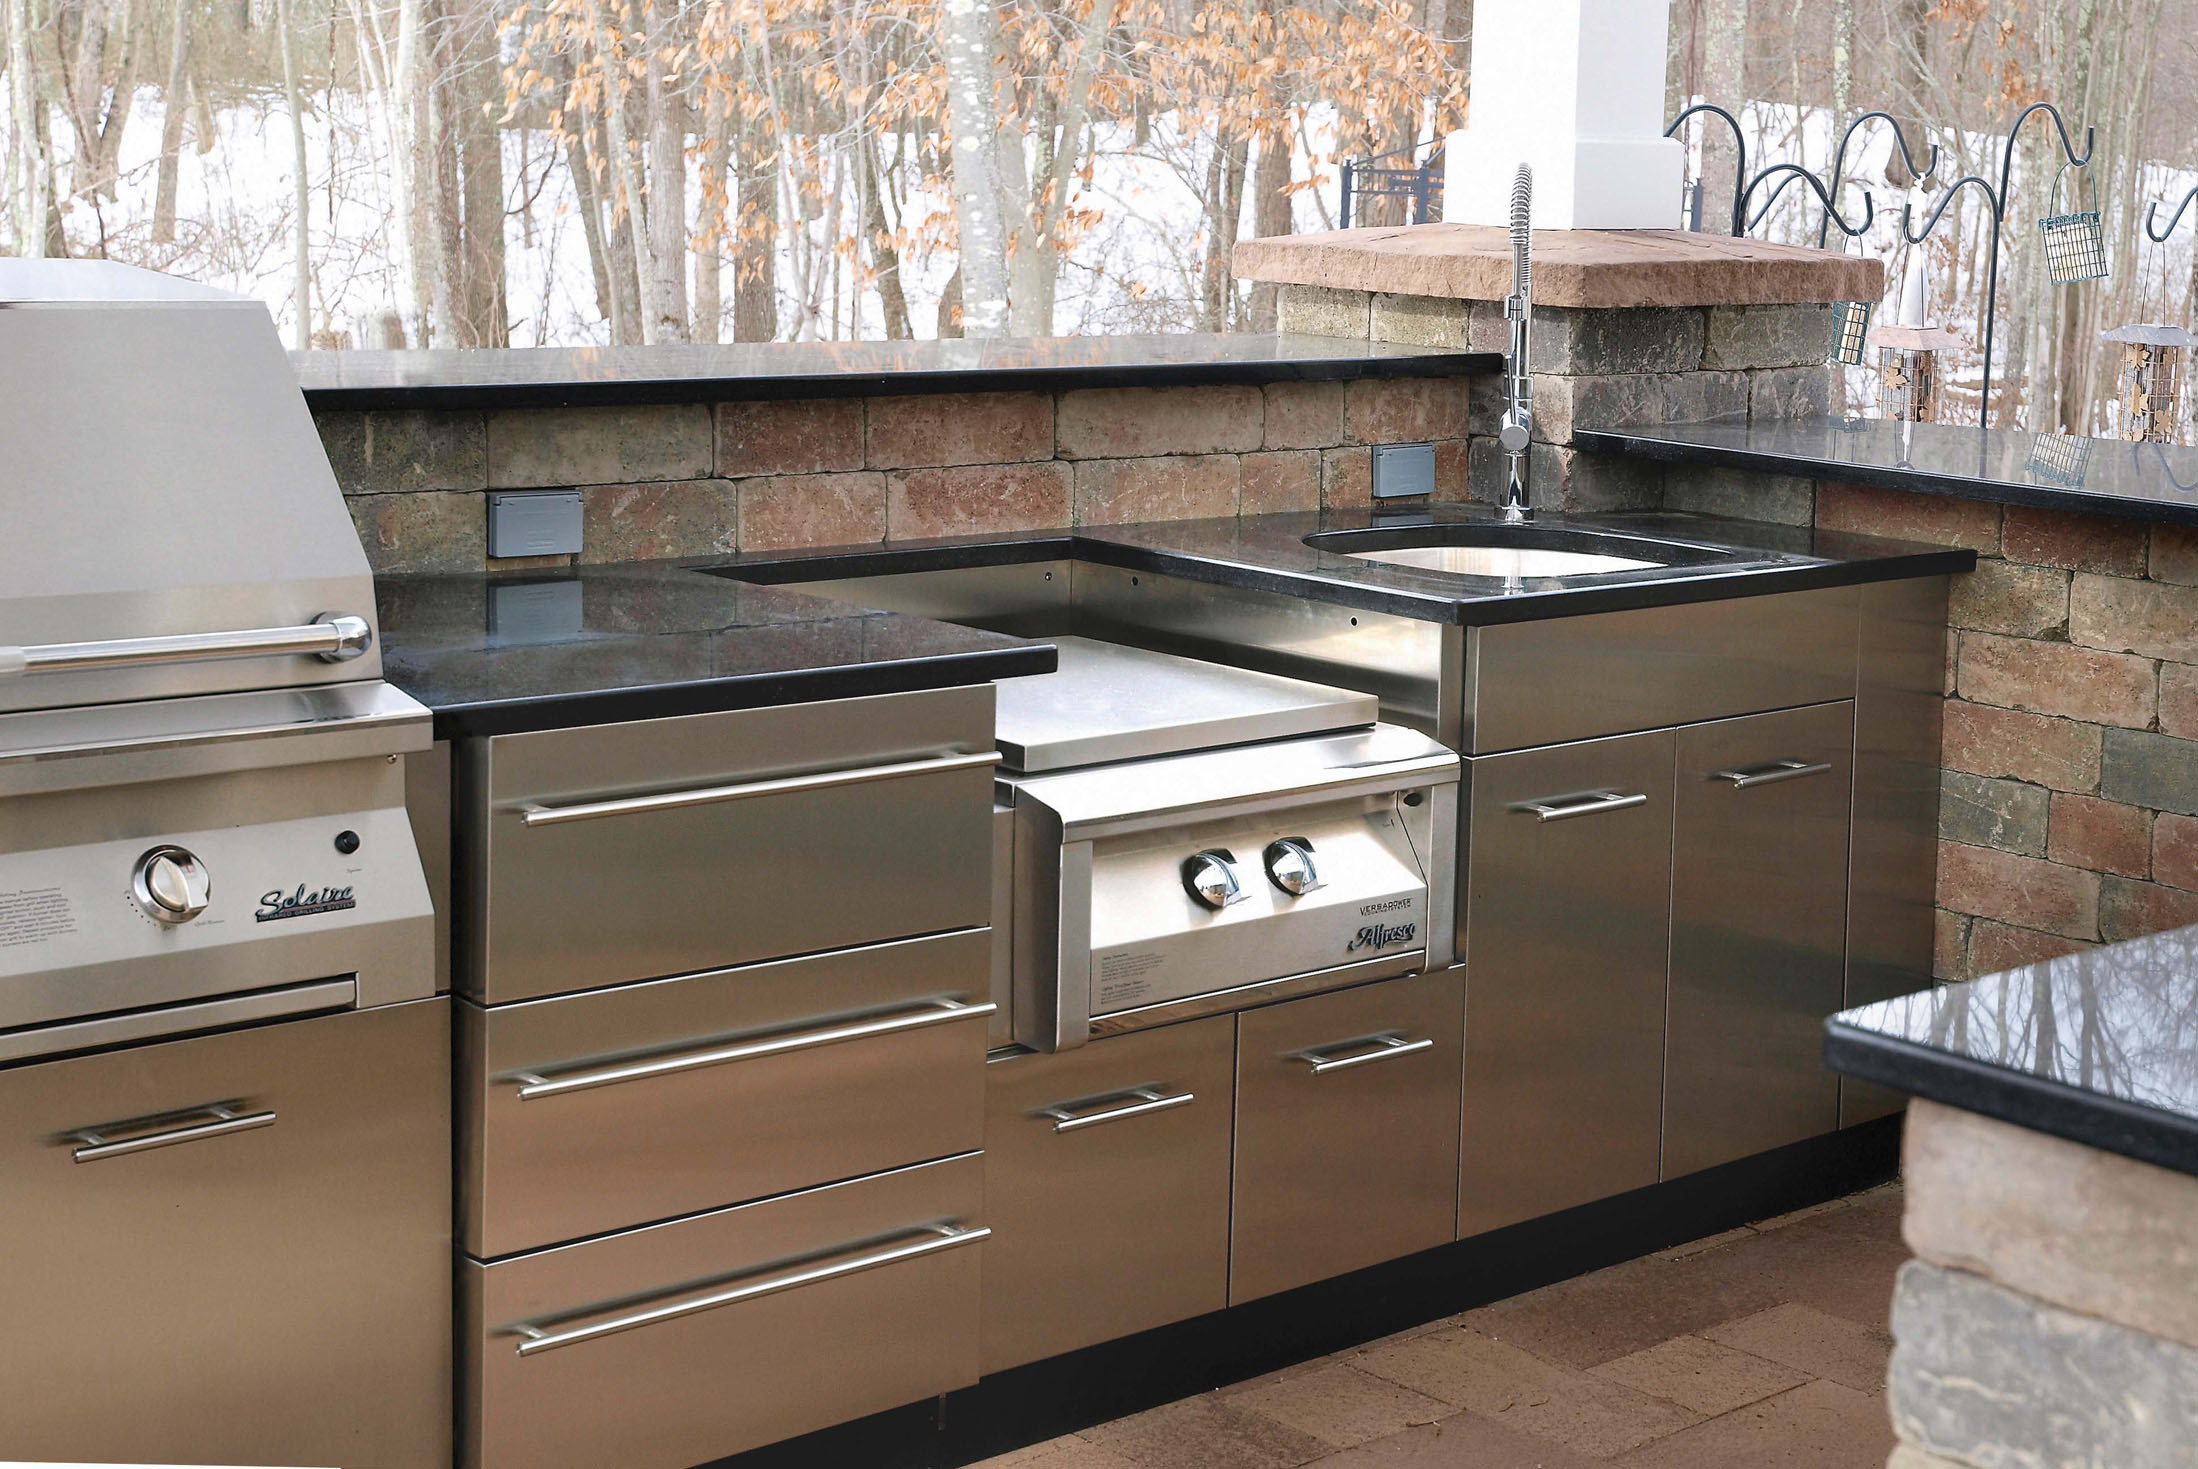 Outdoor Kitchen Cabinets Stainless Steel Lovely Outdoor Stainless Kitchen In Winter In Ct